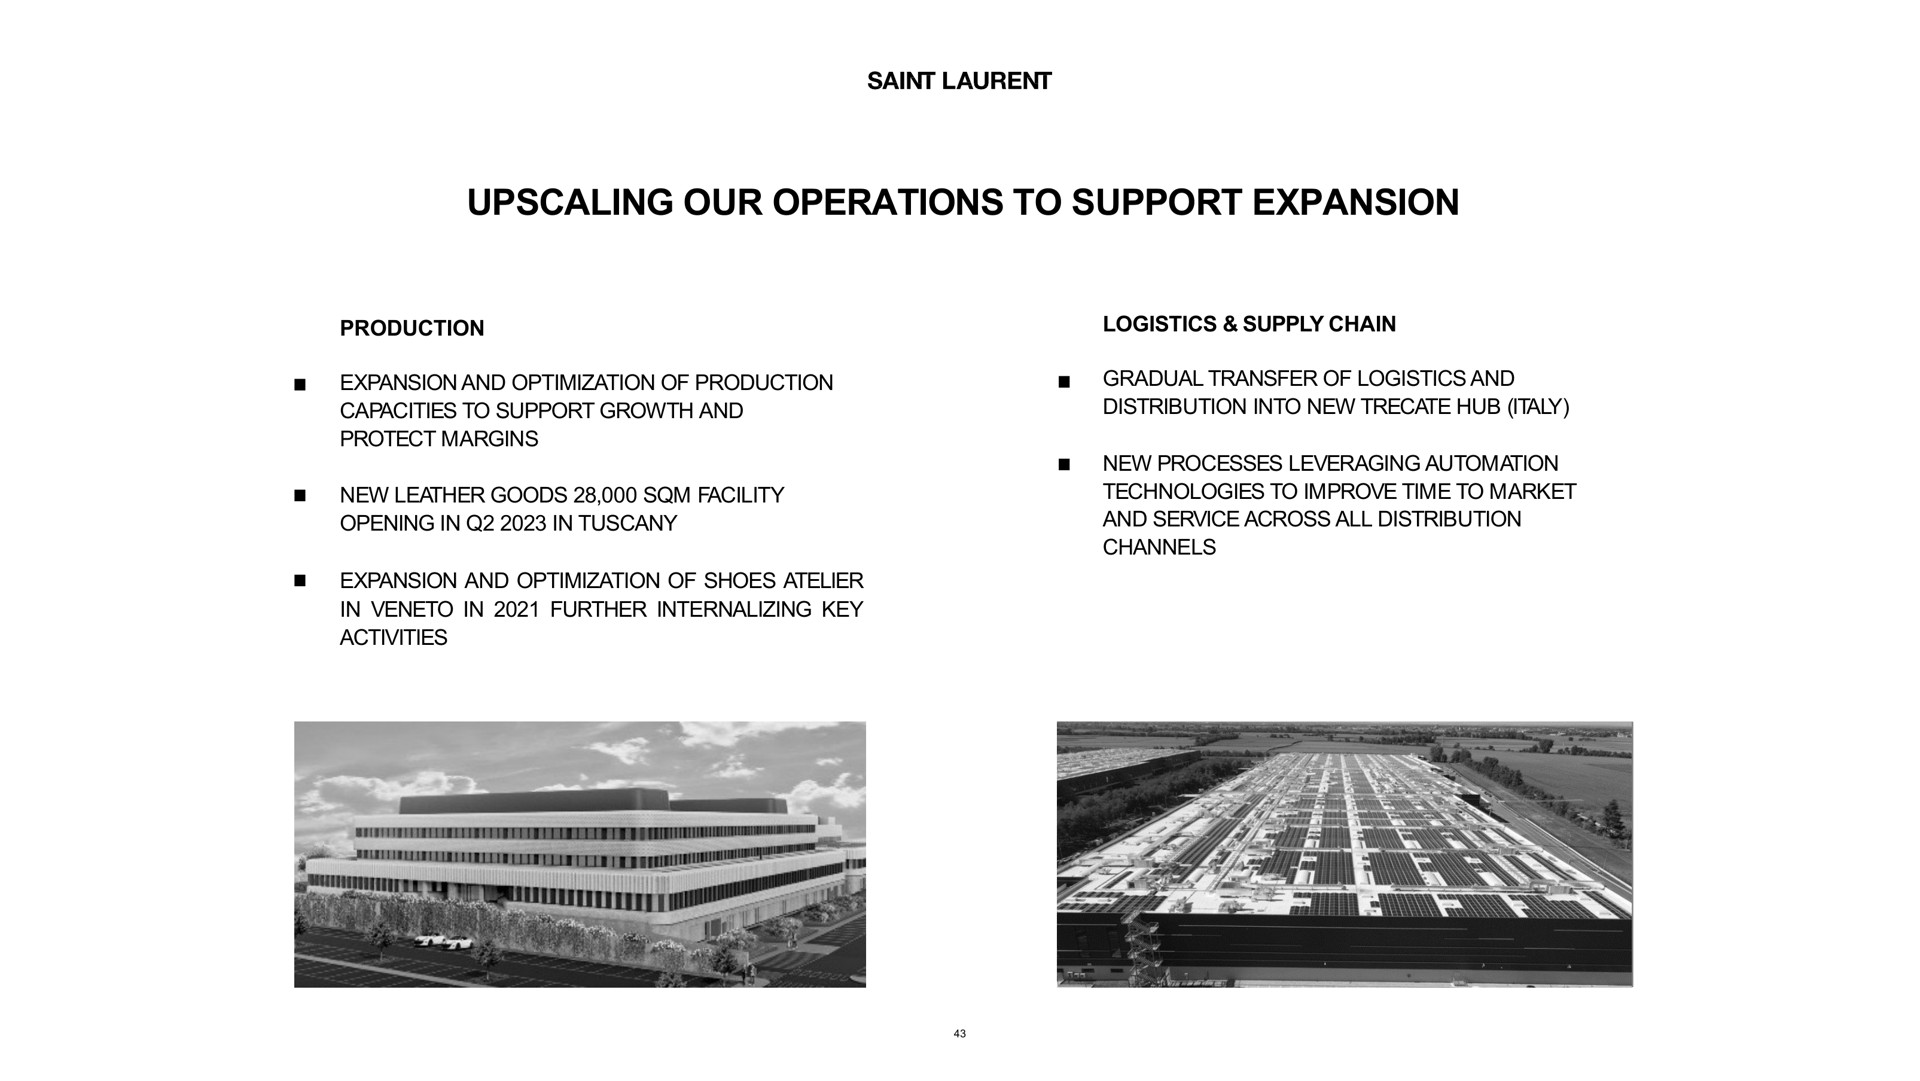 our operations to support expansion | Kering